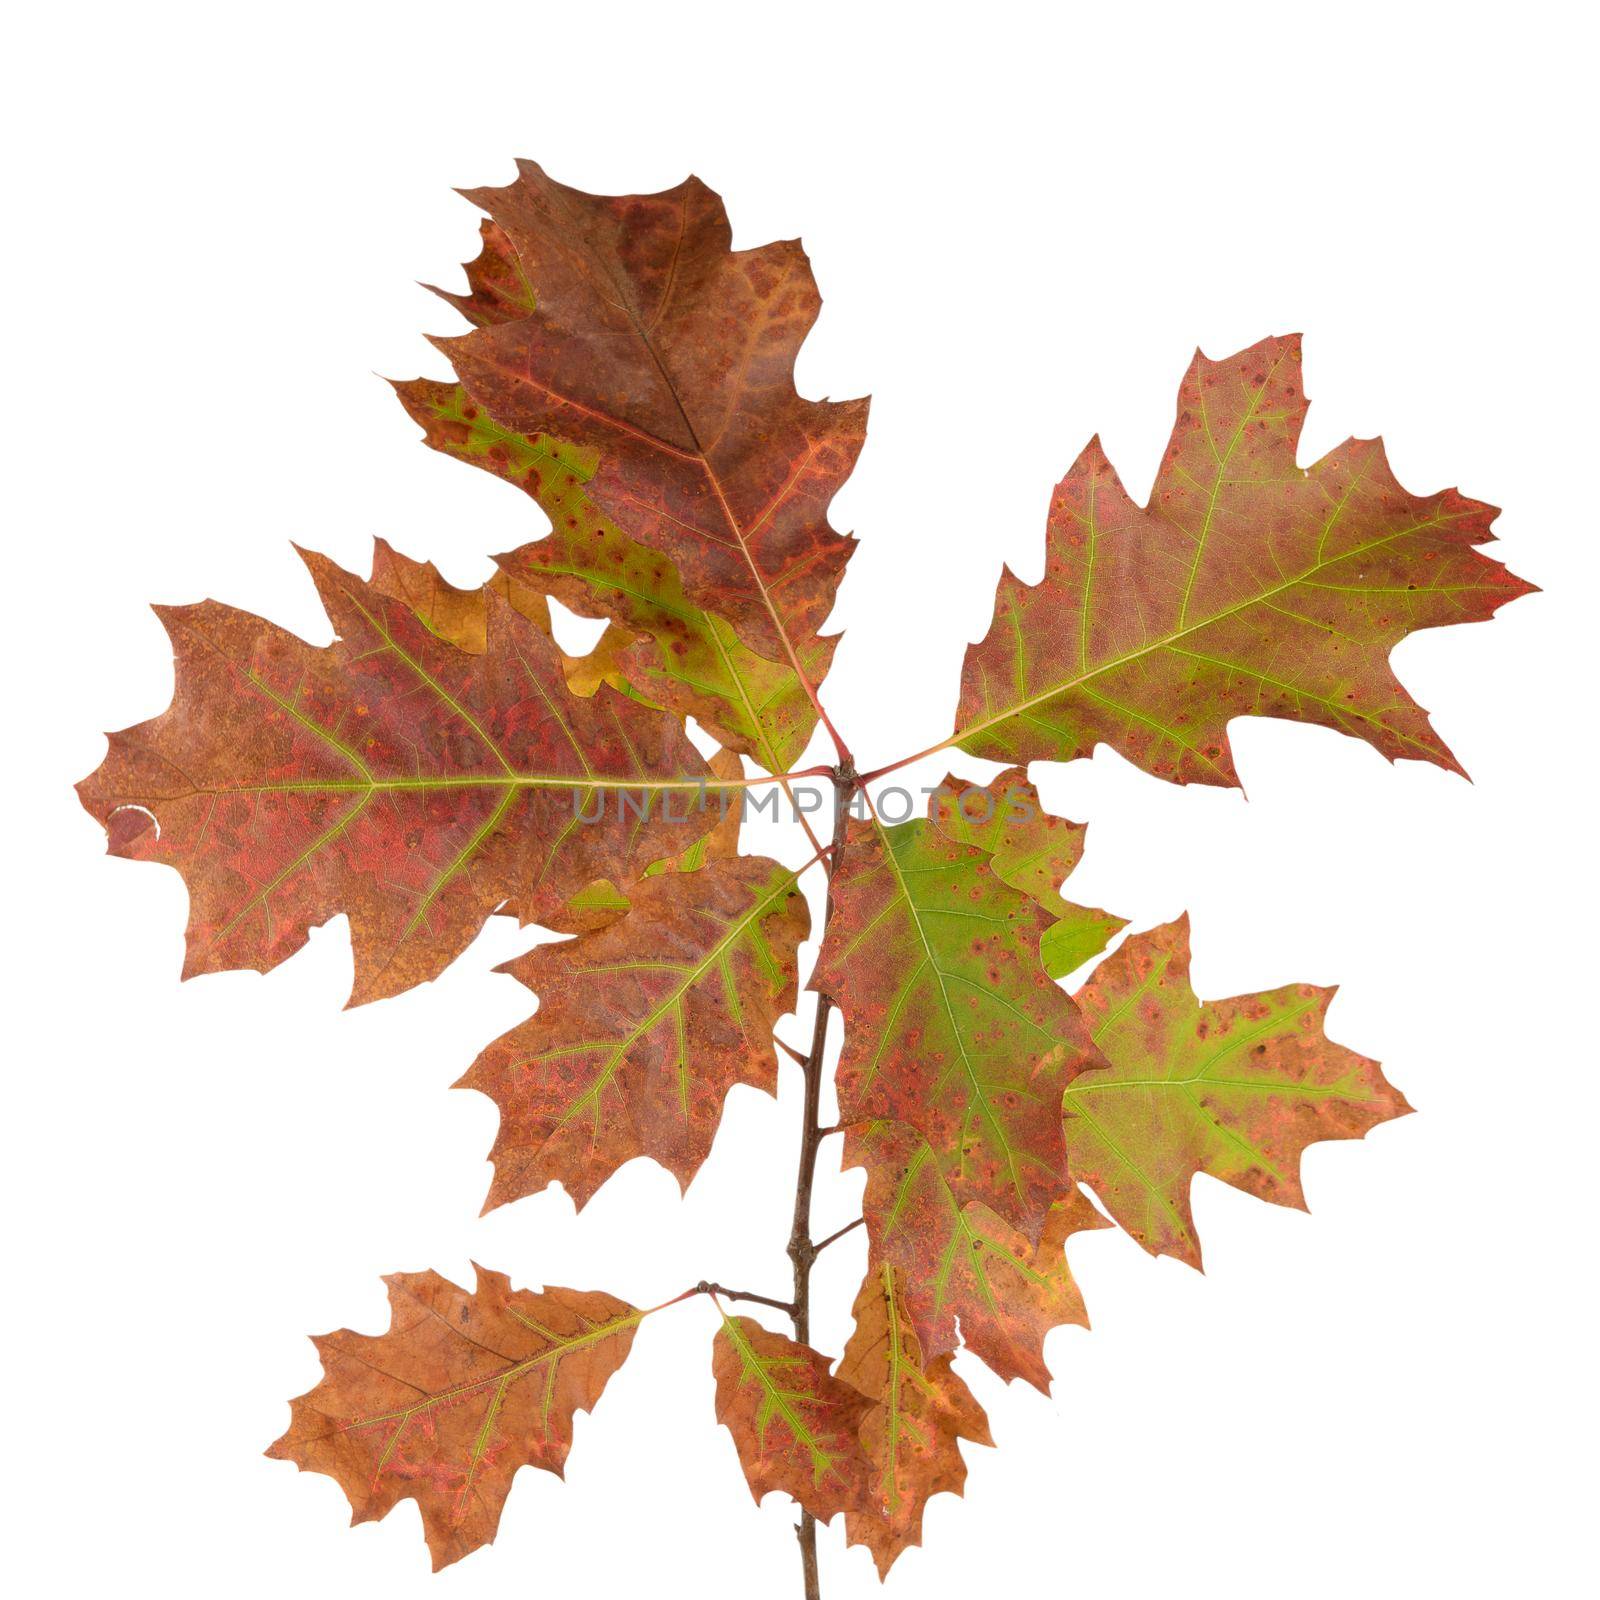 Northern red oak is the most popular hardwood in the US. The foliage on this tree is stunning, with dark green leaves in summer giving away to brilliant red in the fall. Branch isolated on white background.